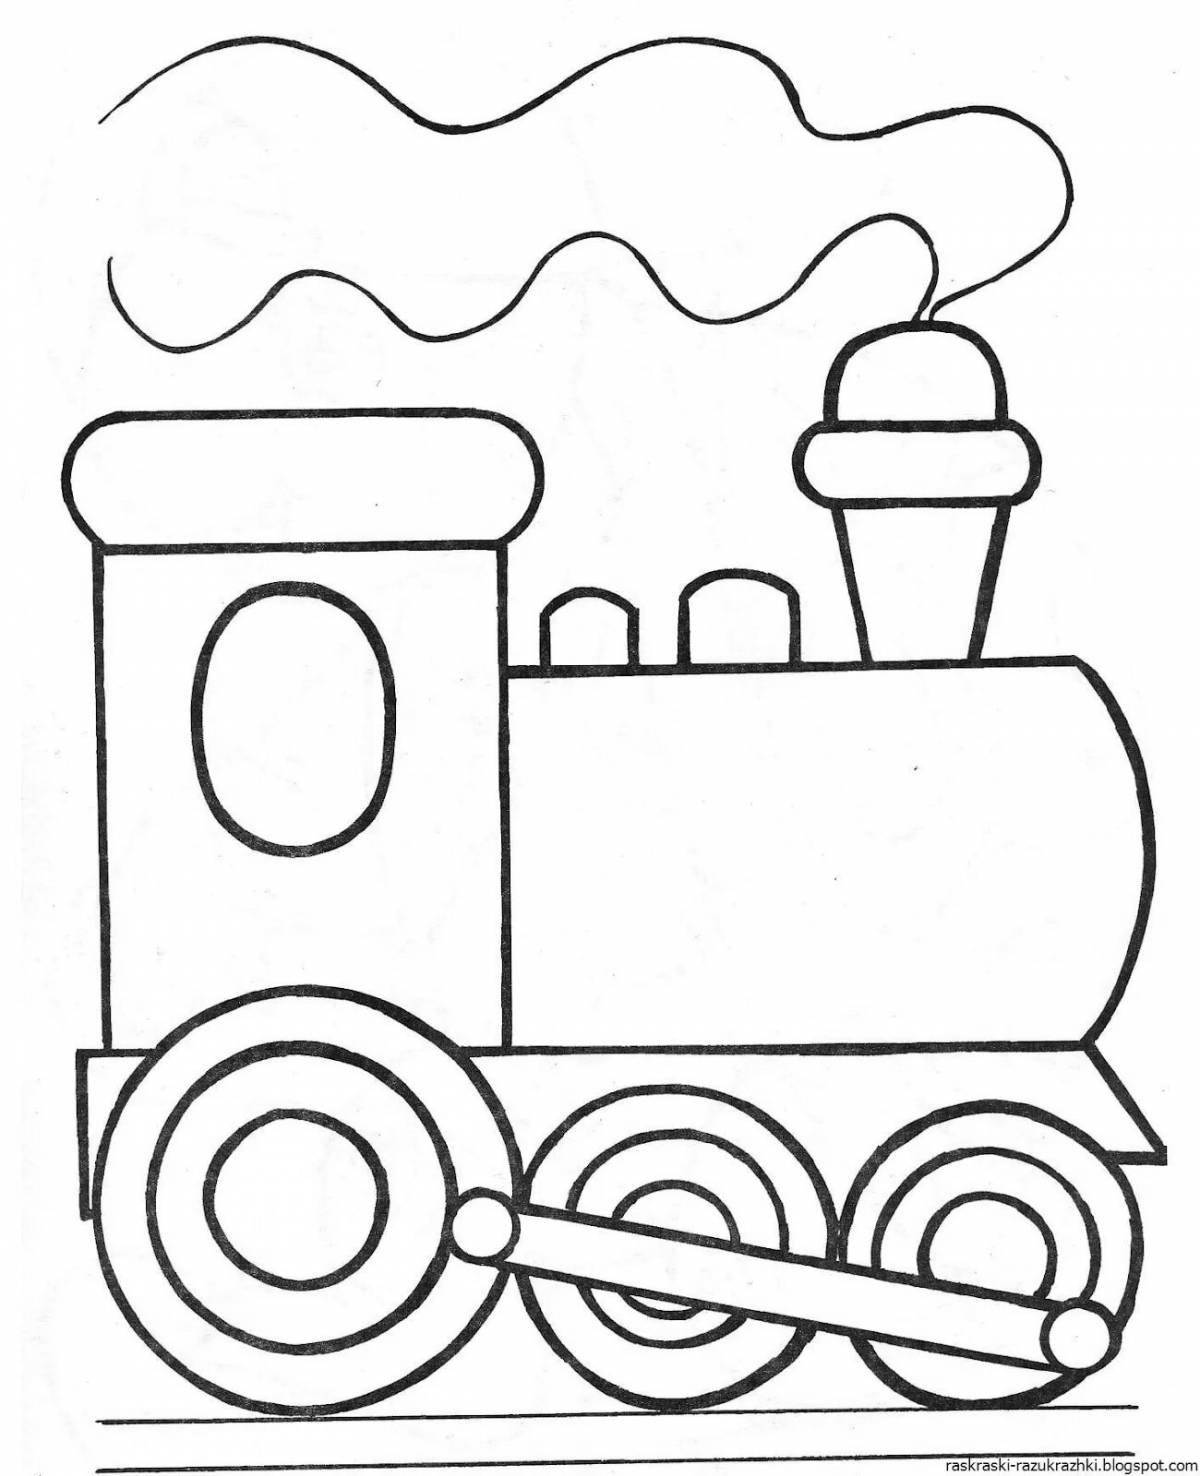 Great train coloring book for 2-3 year olds